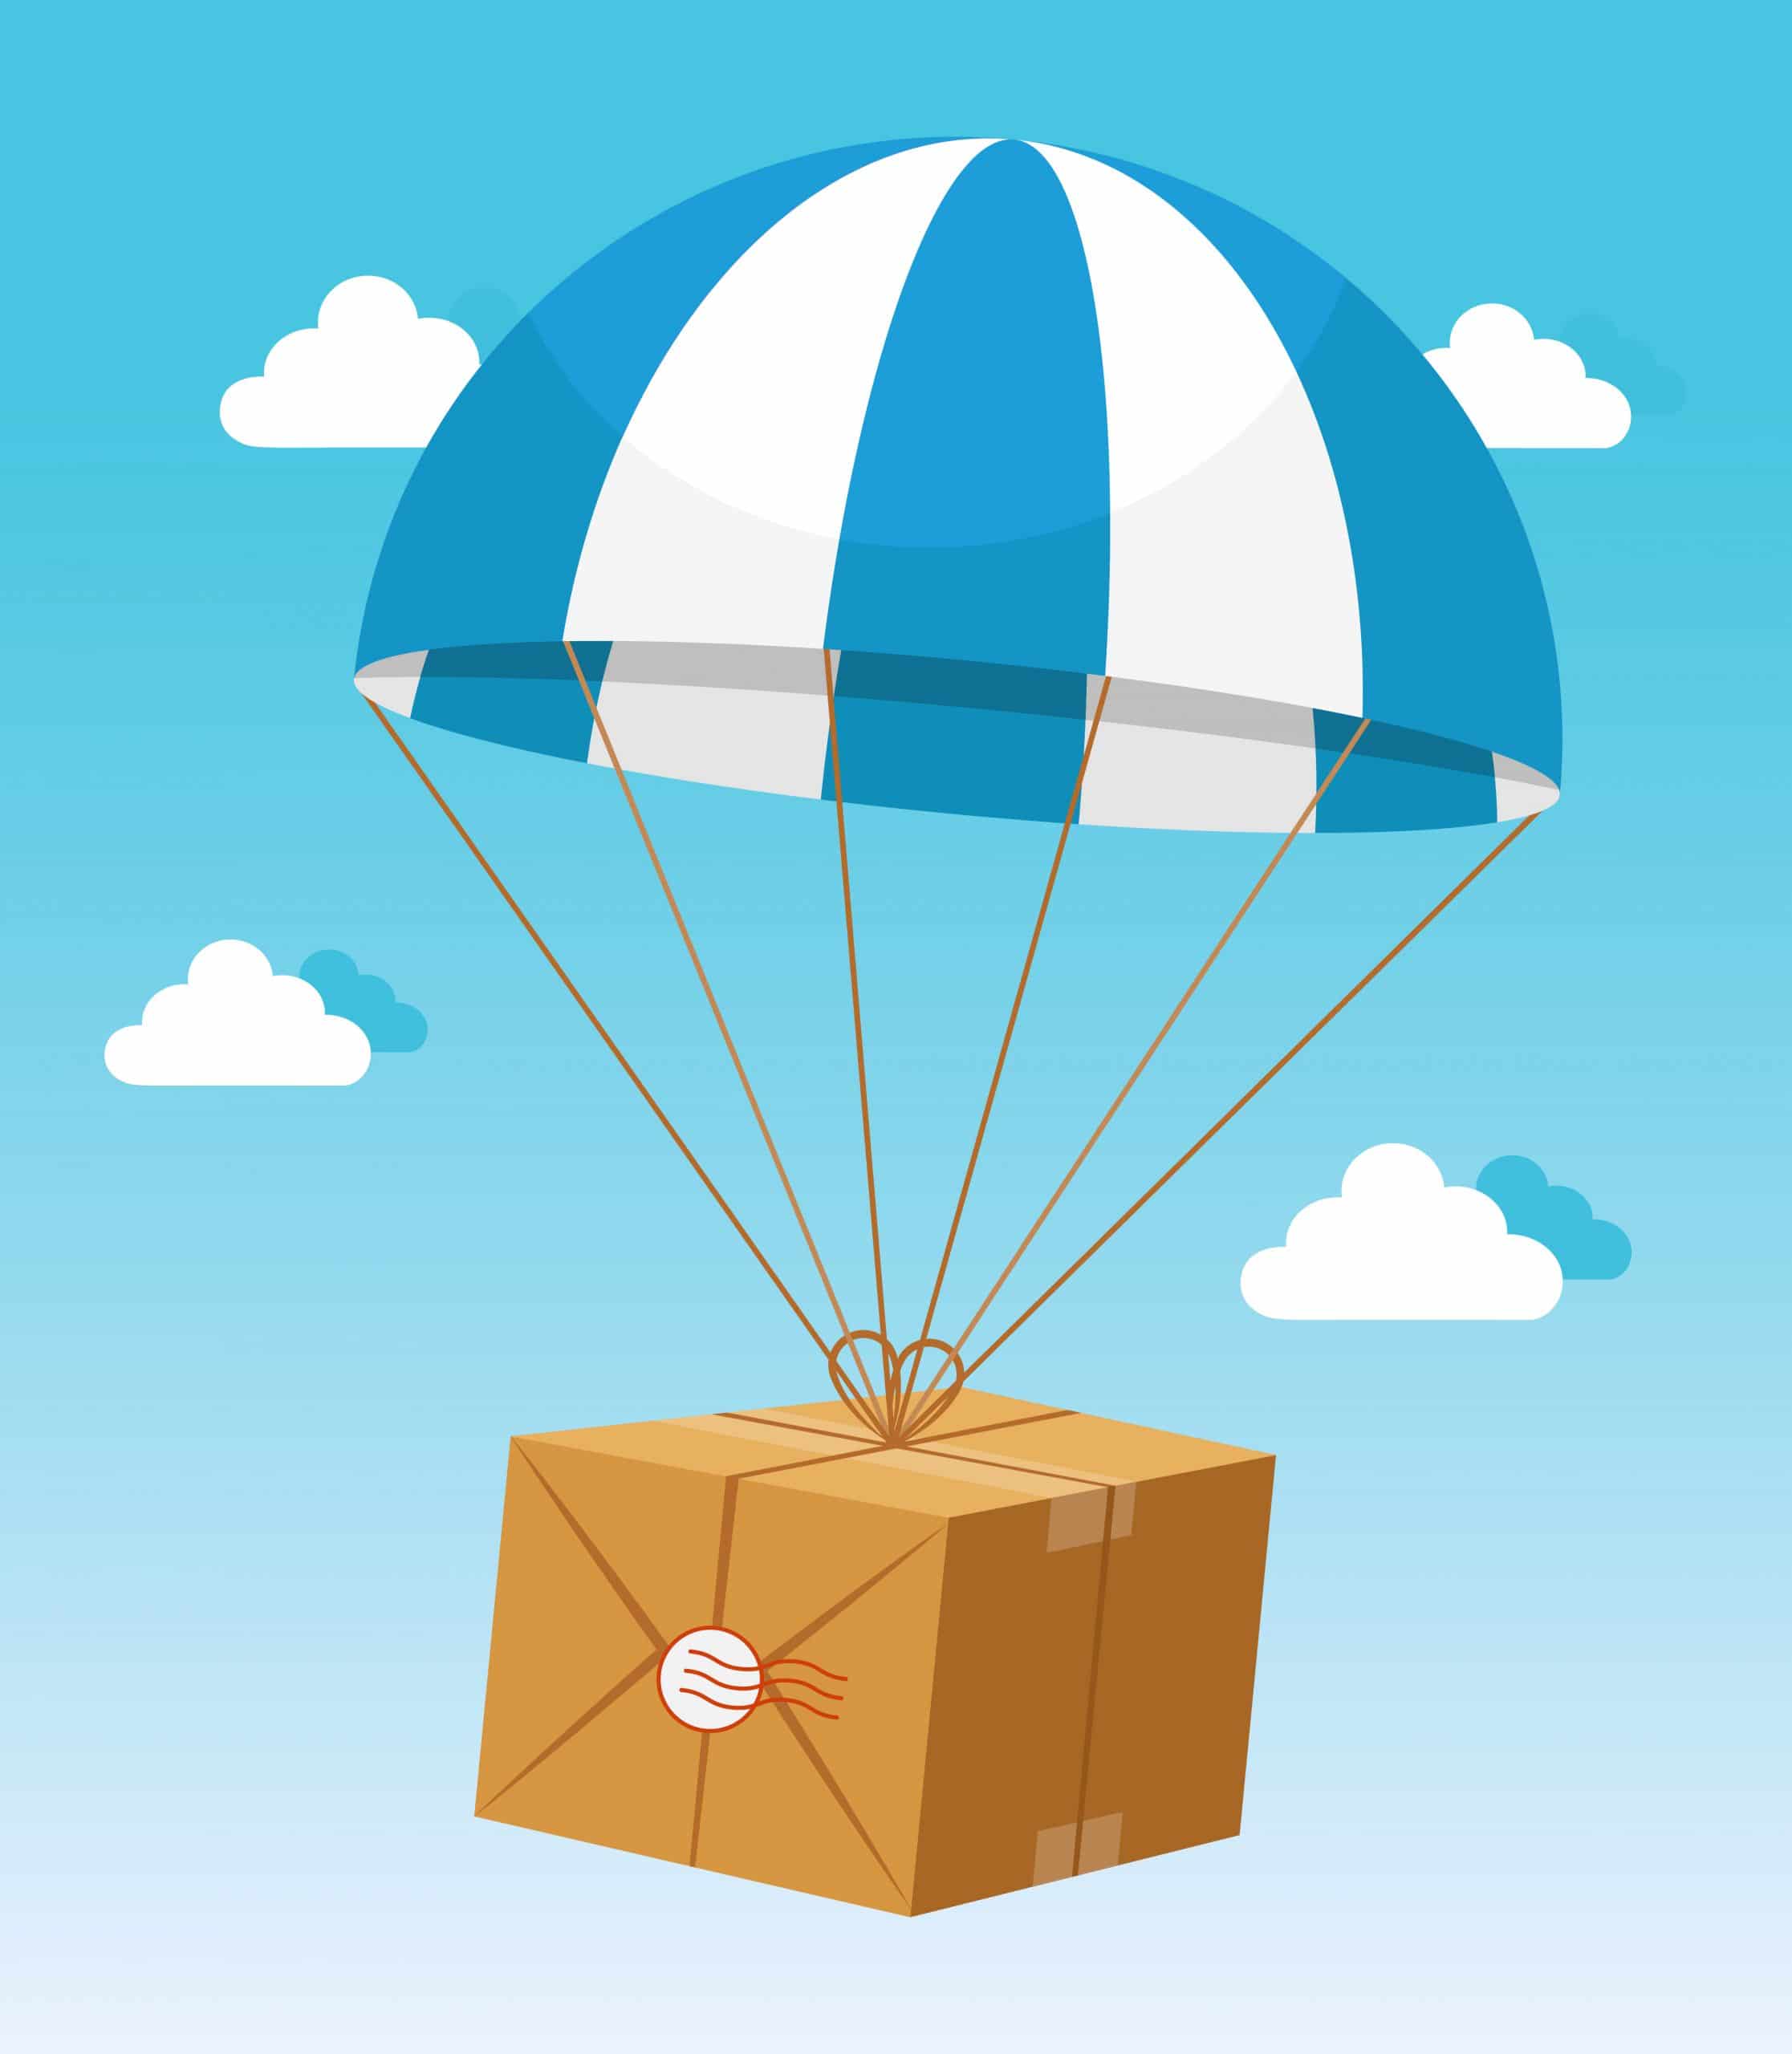 Blue and White Parachute Holding Delivery Box